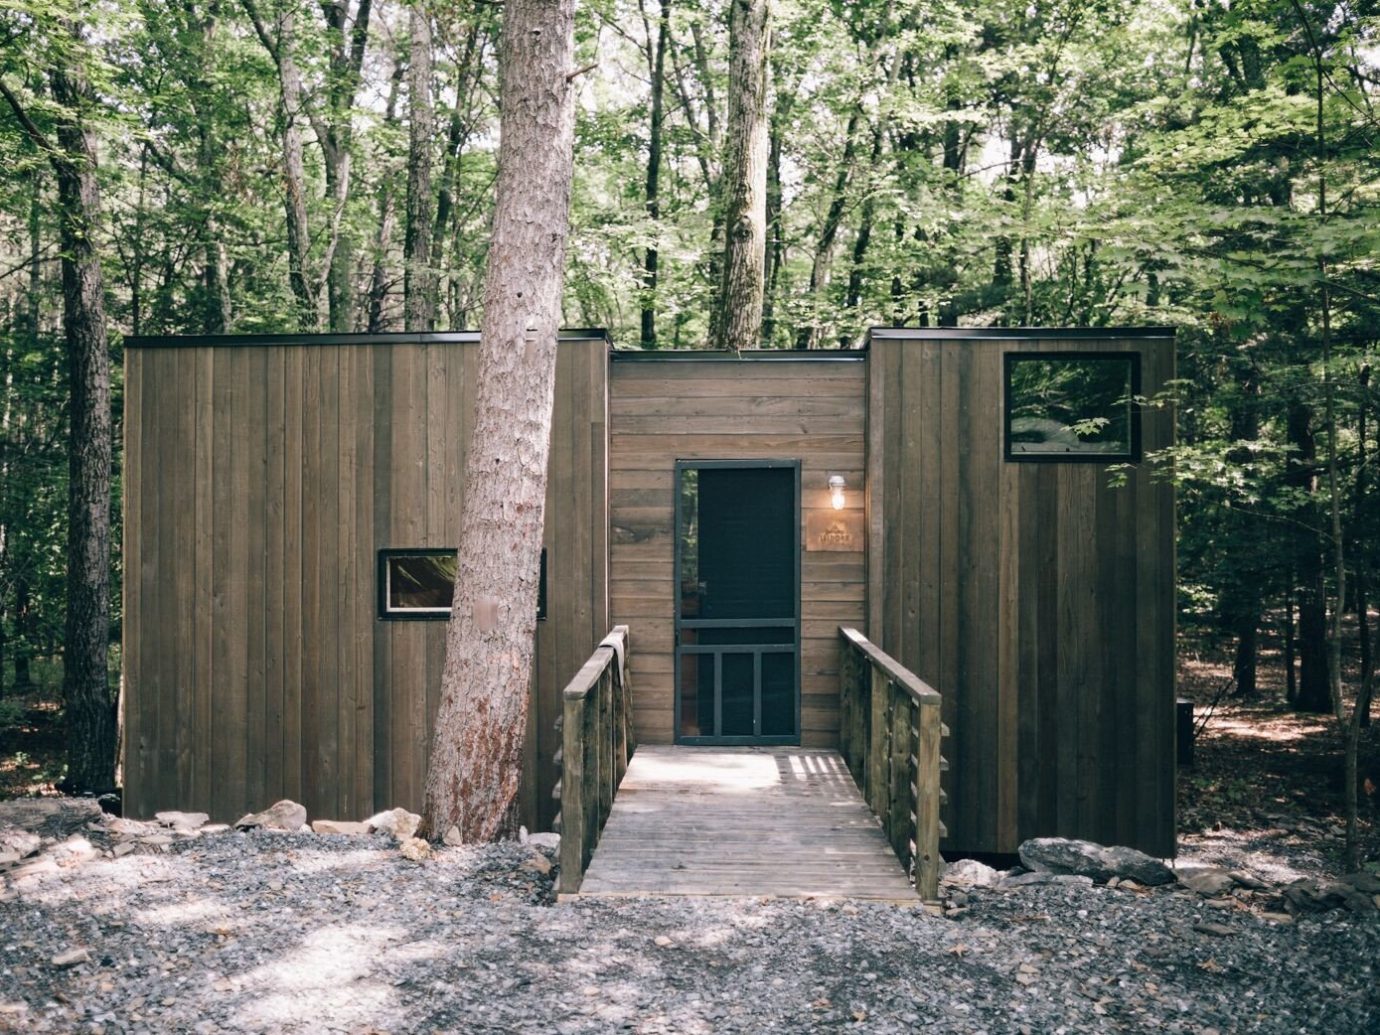 Boutique Hotels Fall Travel Hotels Outdoors + Adventure tree outdoor ground house shed Architecture cottage home outhouse shack siding wood real estate outdoor structure log cabin facade garden buildings state park hut Forest